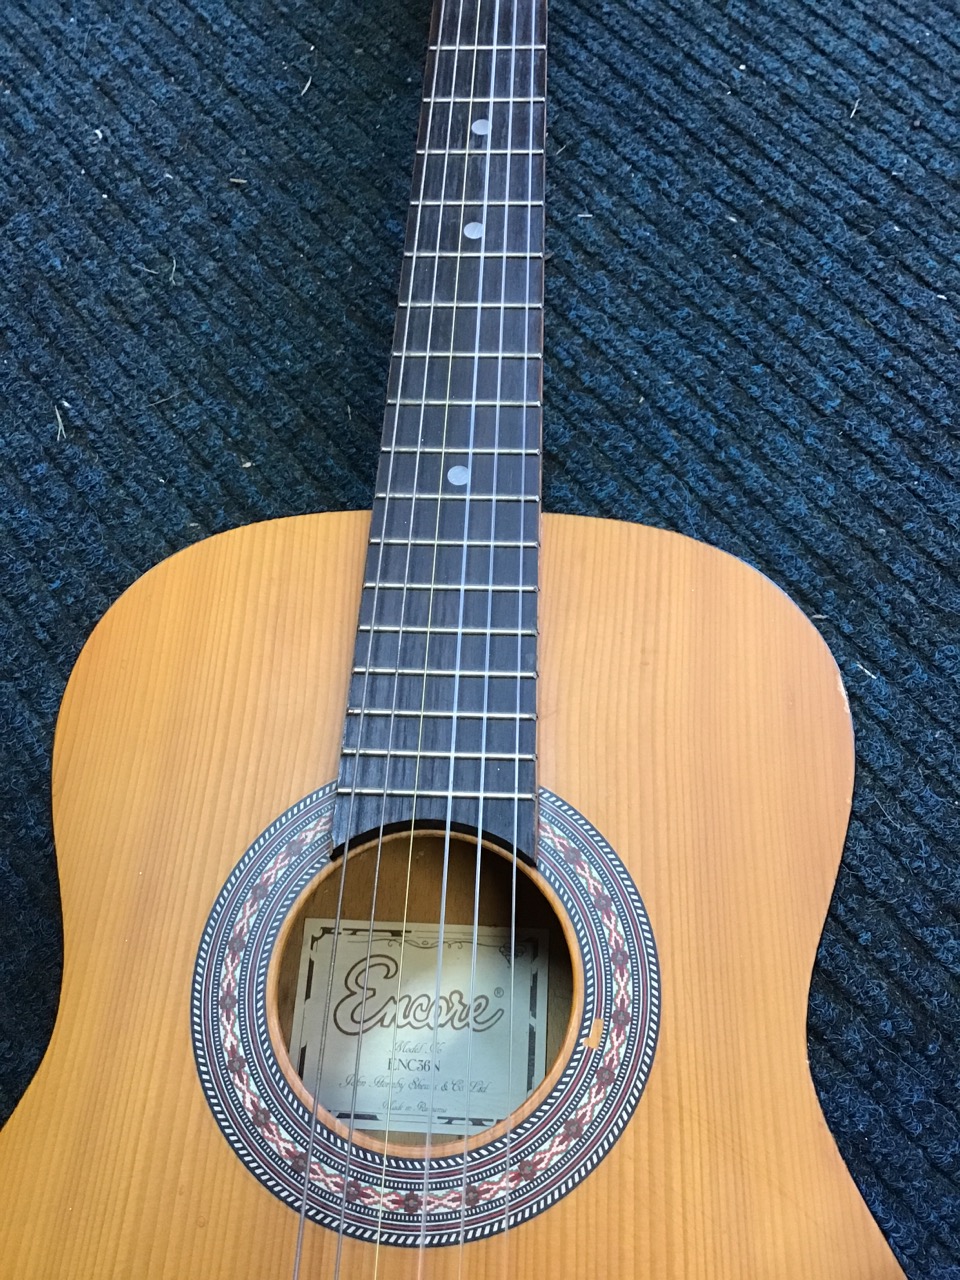 A Romanian nylon strung classical guitar by Encore - model ENC36N, with mosaic style decoration to - Bild 2 aus 3